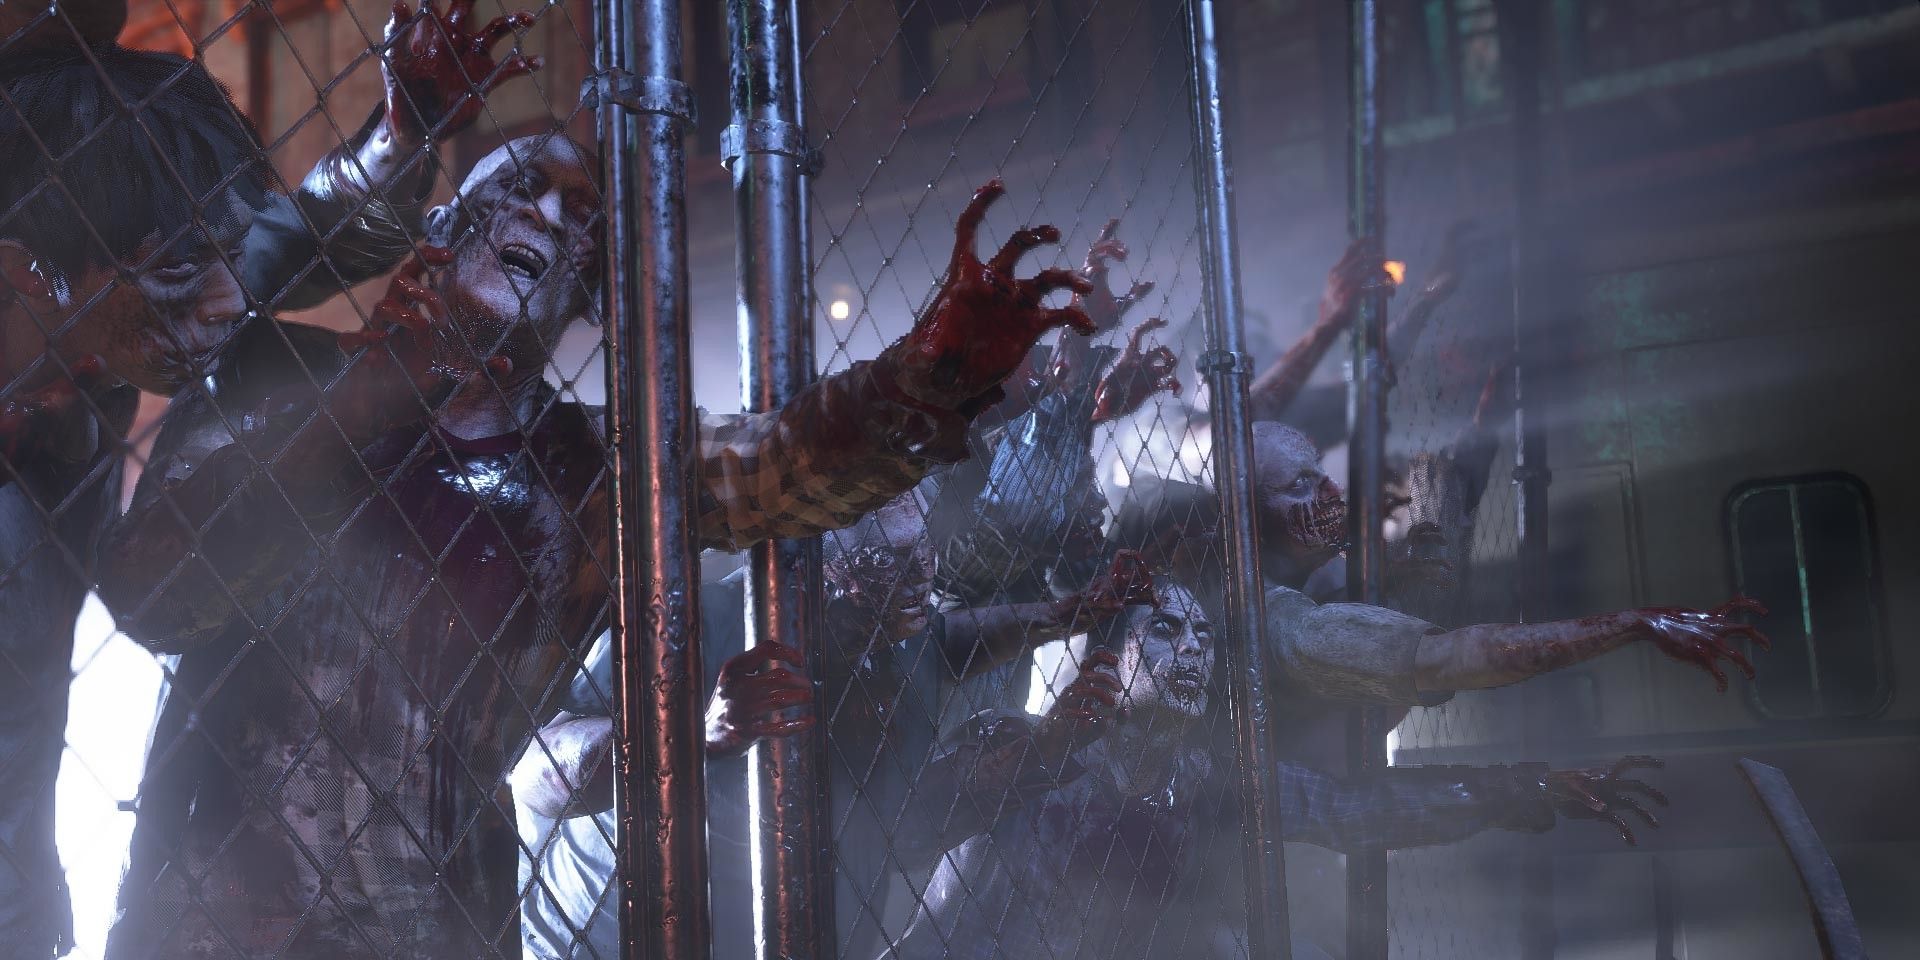 Resident Evil 3 Remake cover art leaks ahead of official announcement